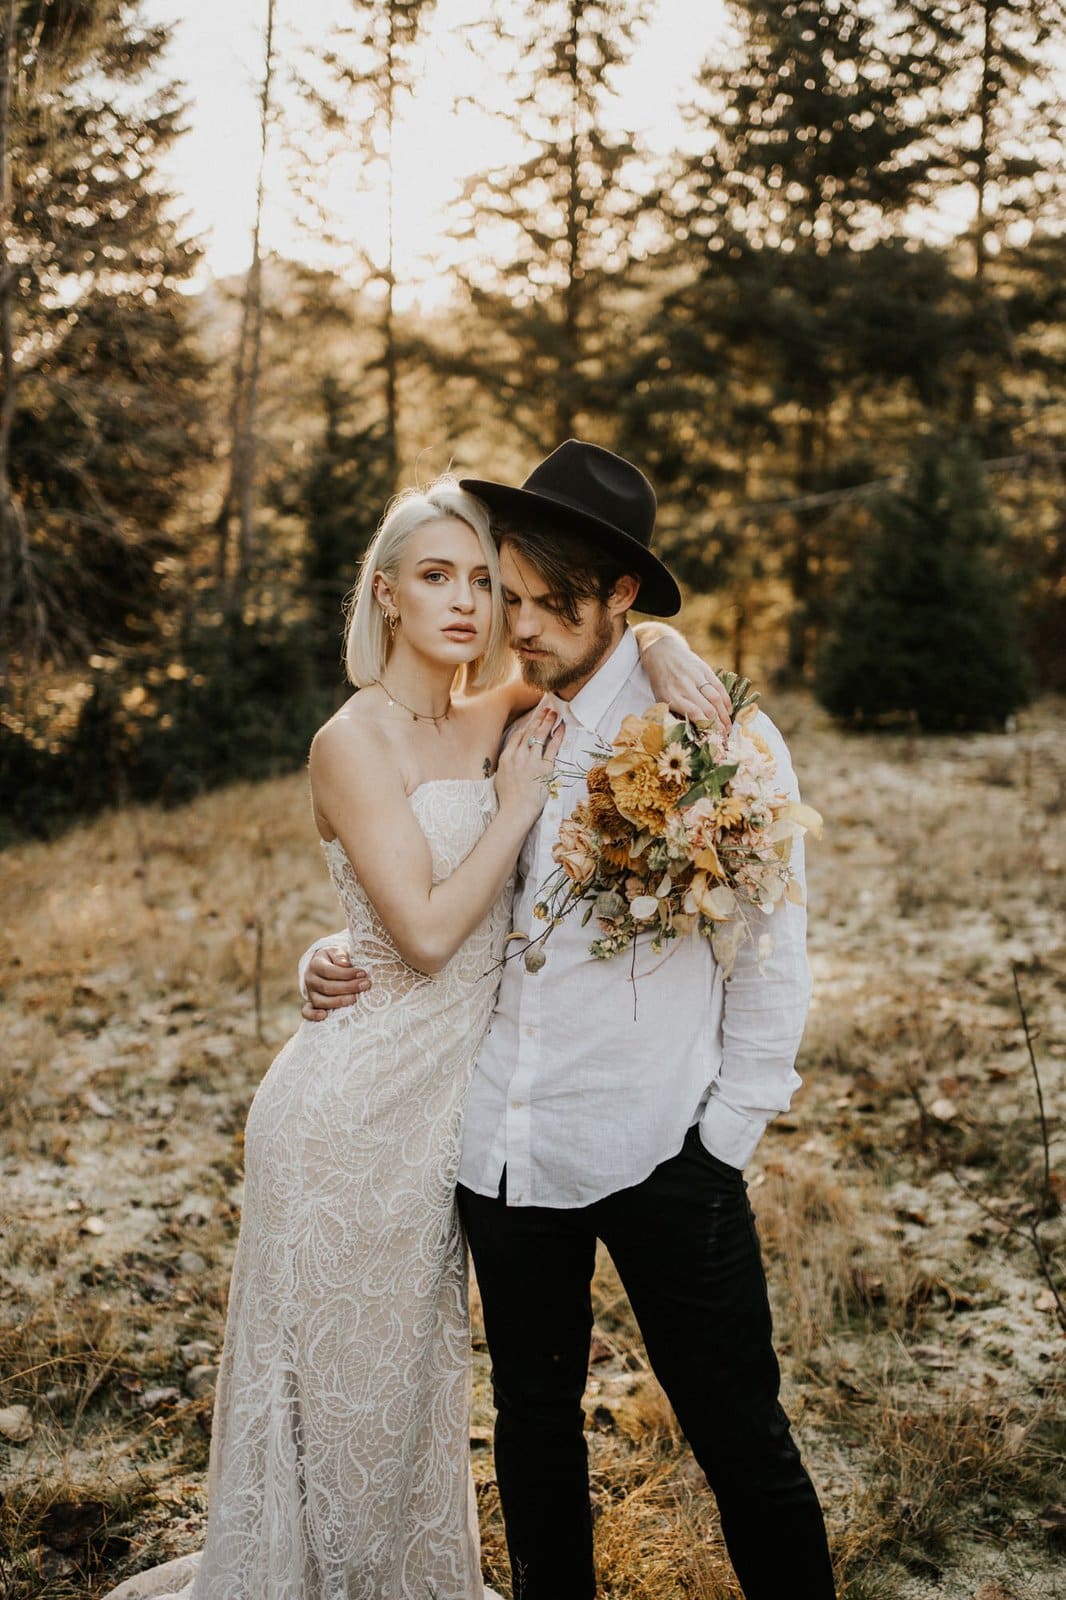 Bride and groom styled intimate wedding.